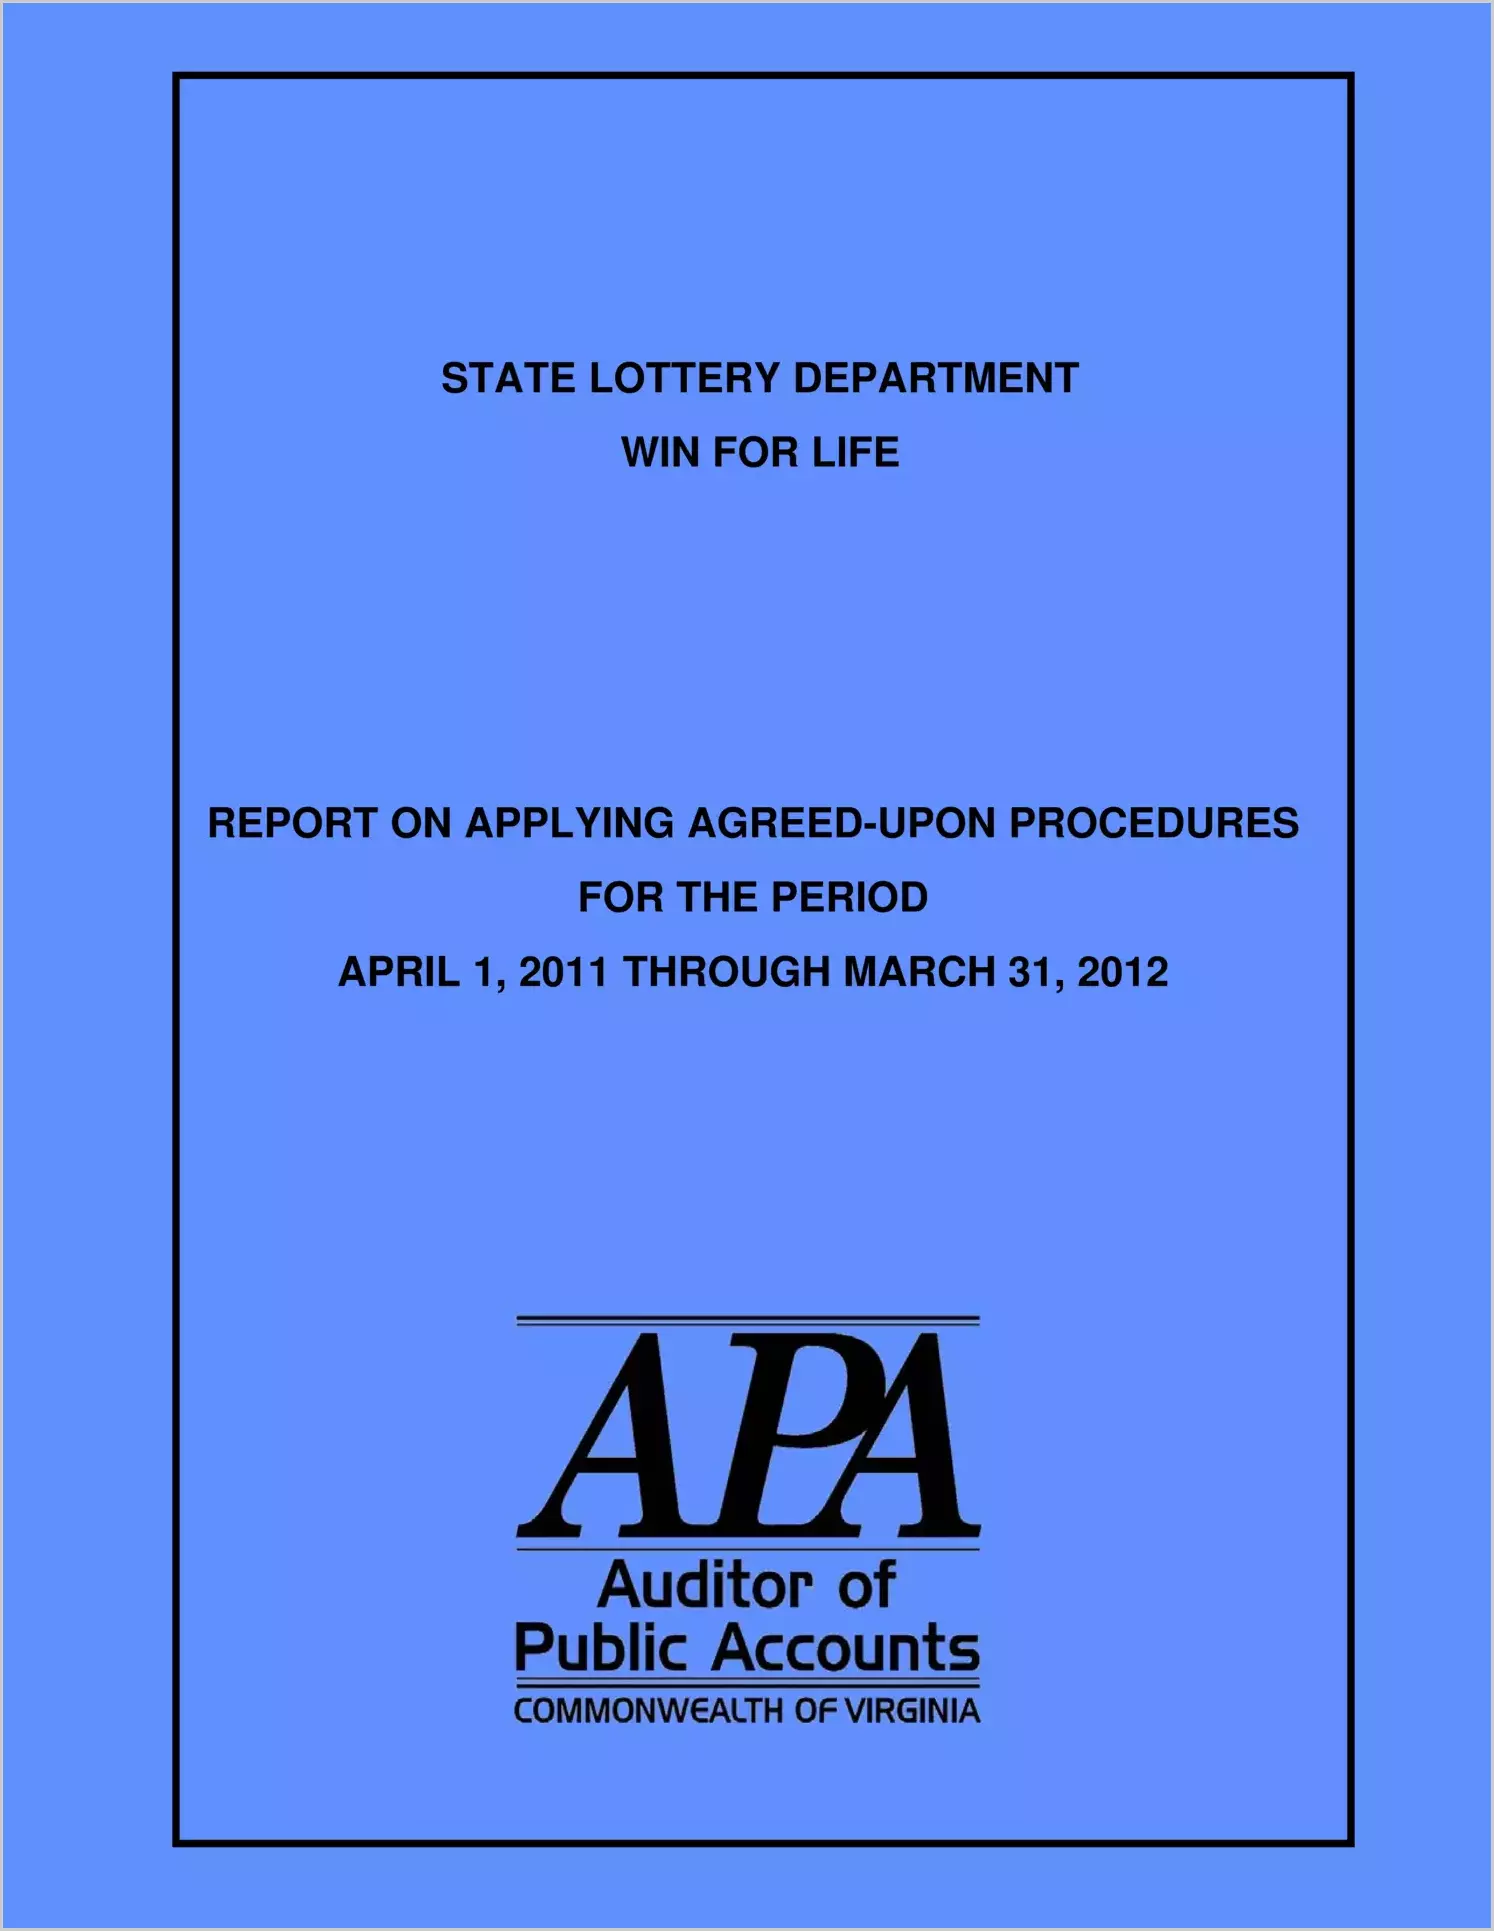 State Lottery Department Win For Life report on Applying Agreed-Upon Procedures for the period for the period April 1, 2011 through March 31, 2012